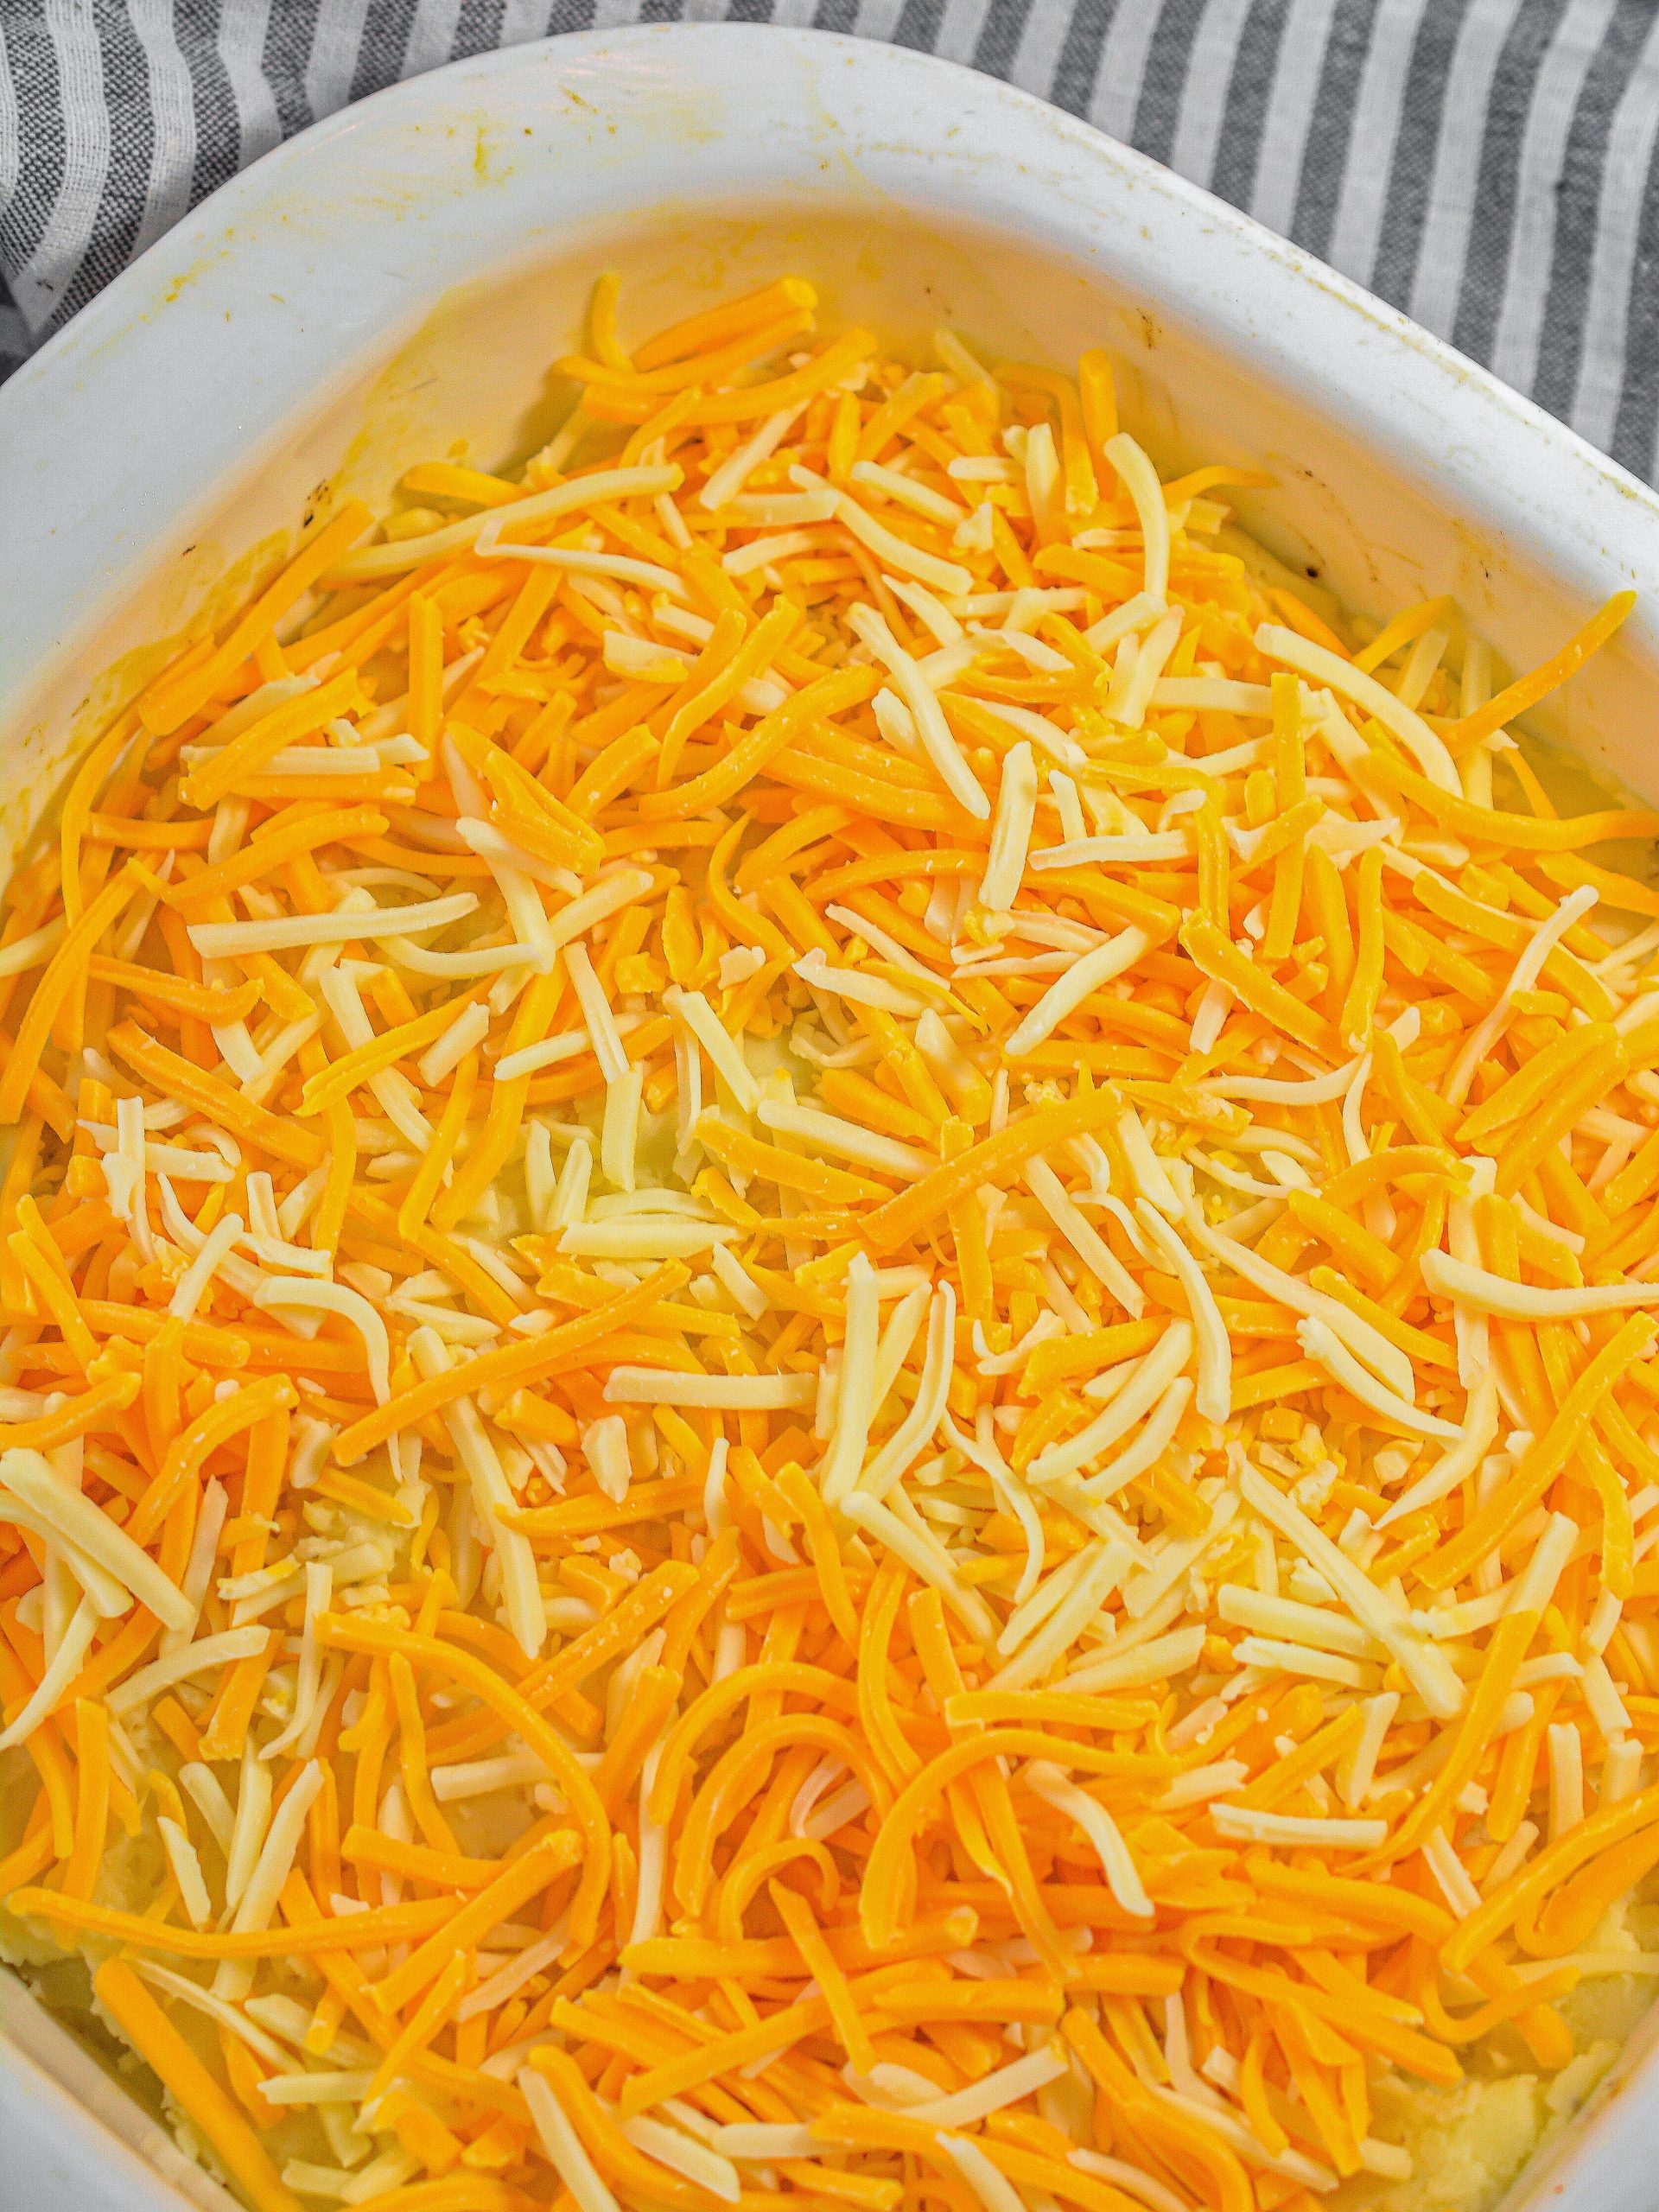 Top the potatoes with the shredded cheese